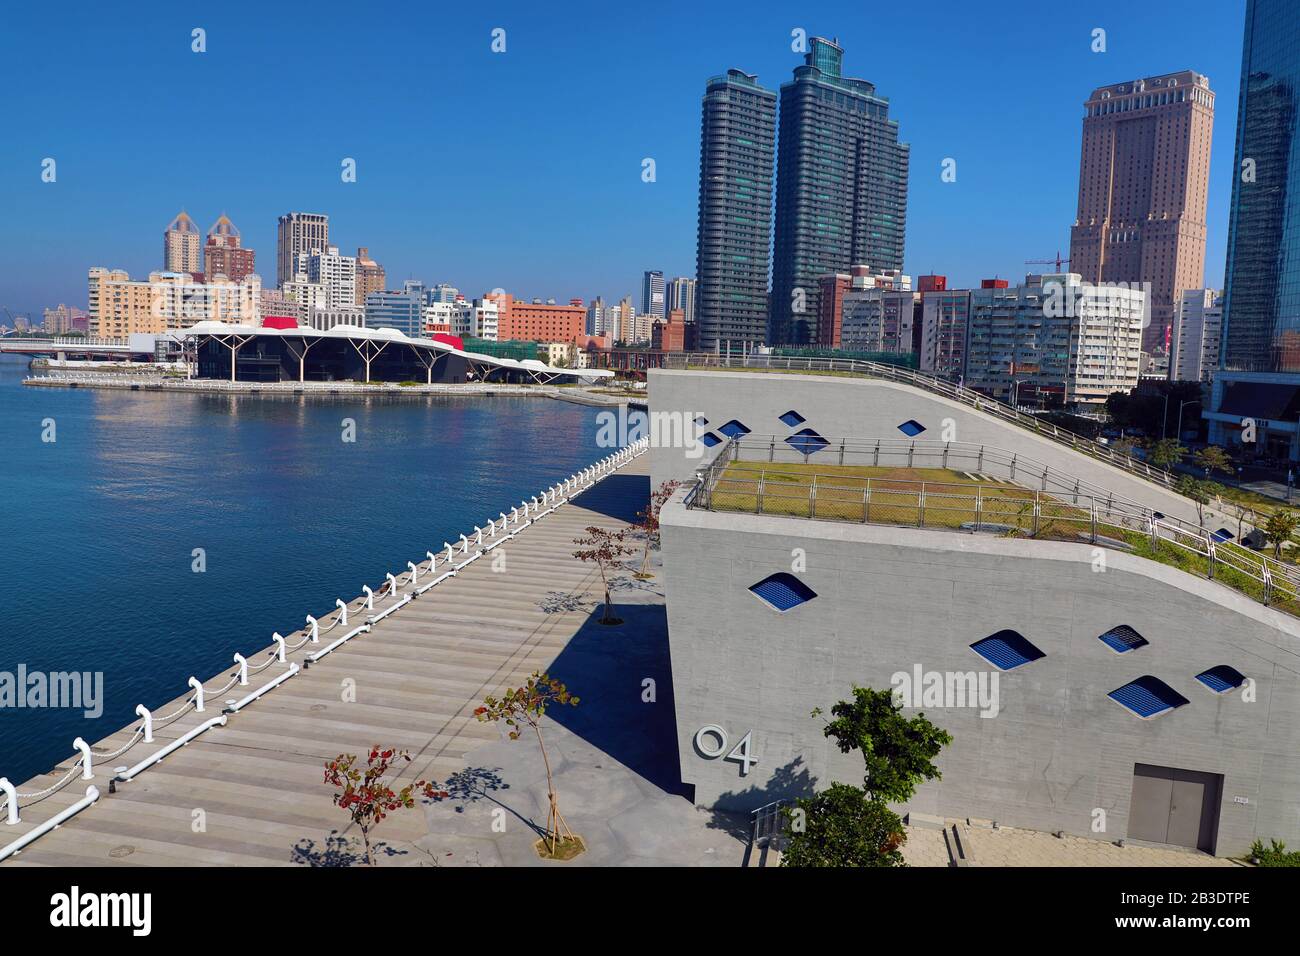 Waterfront and pier in Kaohsiung Harbour, Kaohsiung City, Taiwan Stock Photo